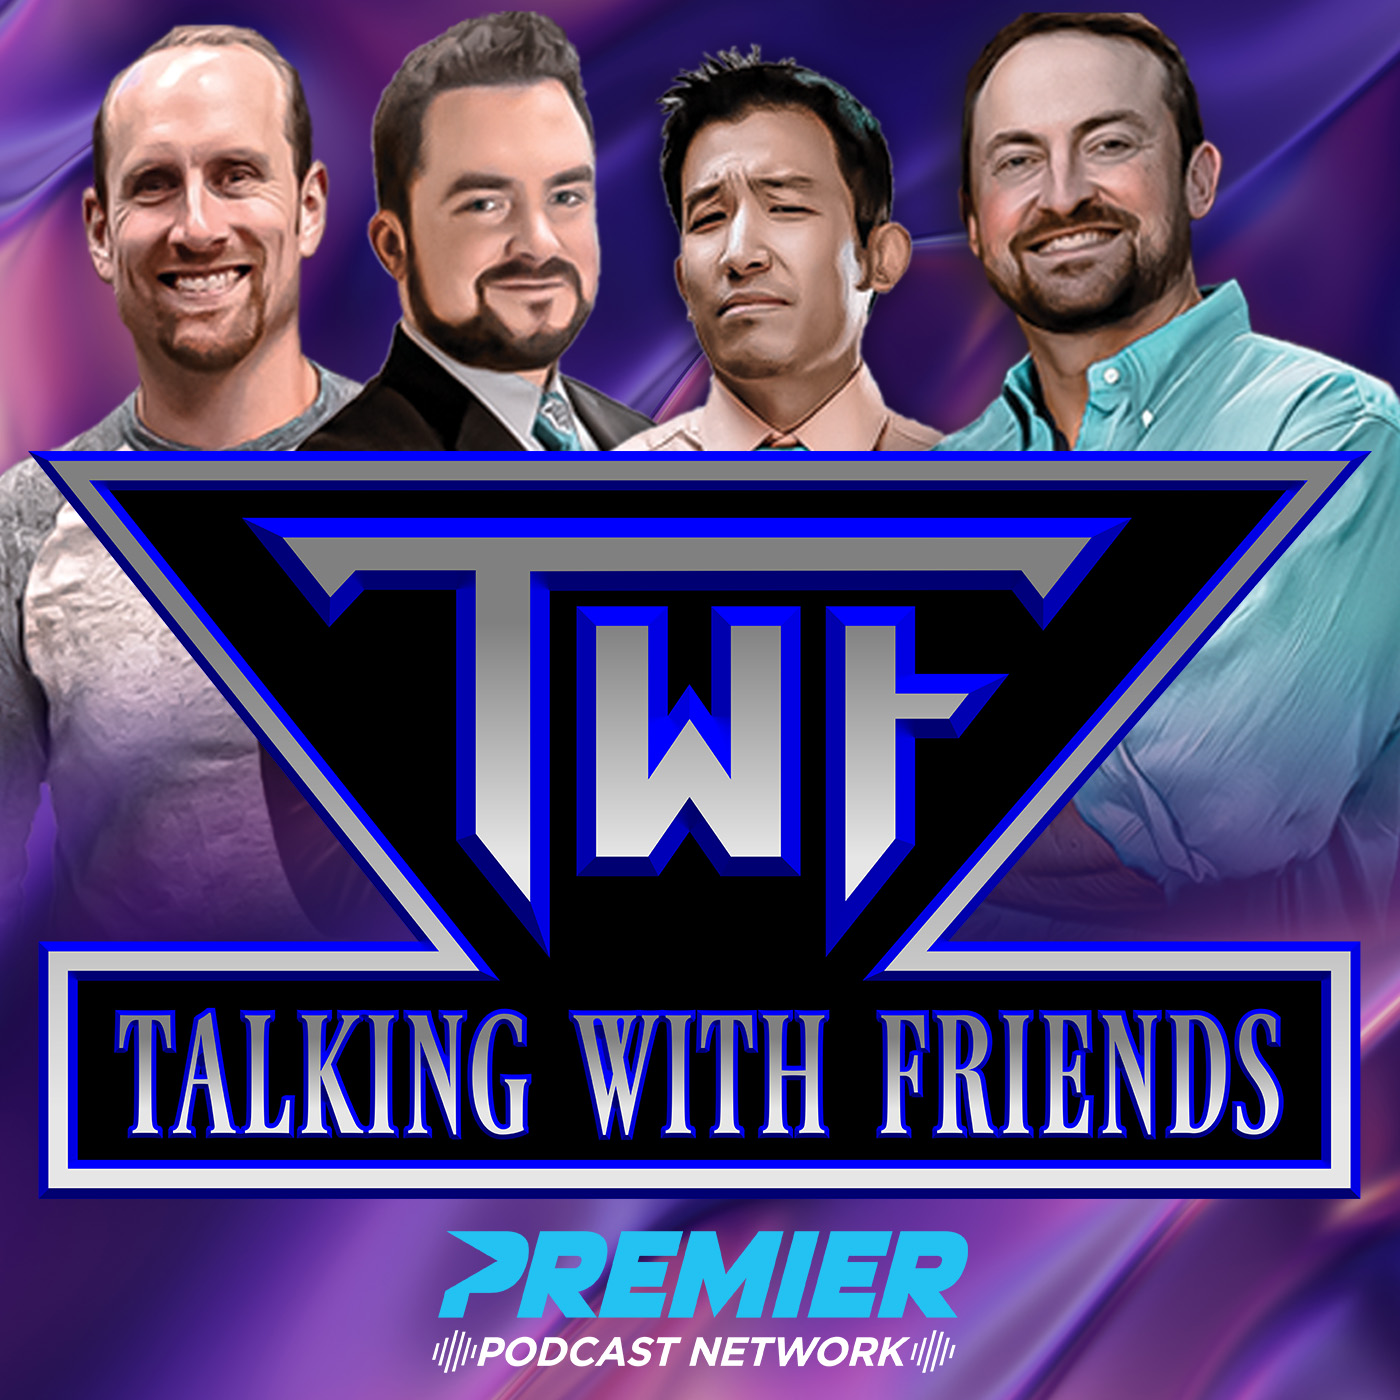 Artwork for Talking With Friends